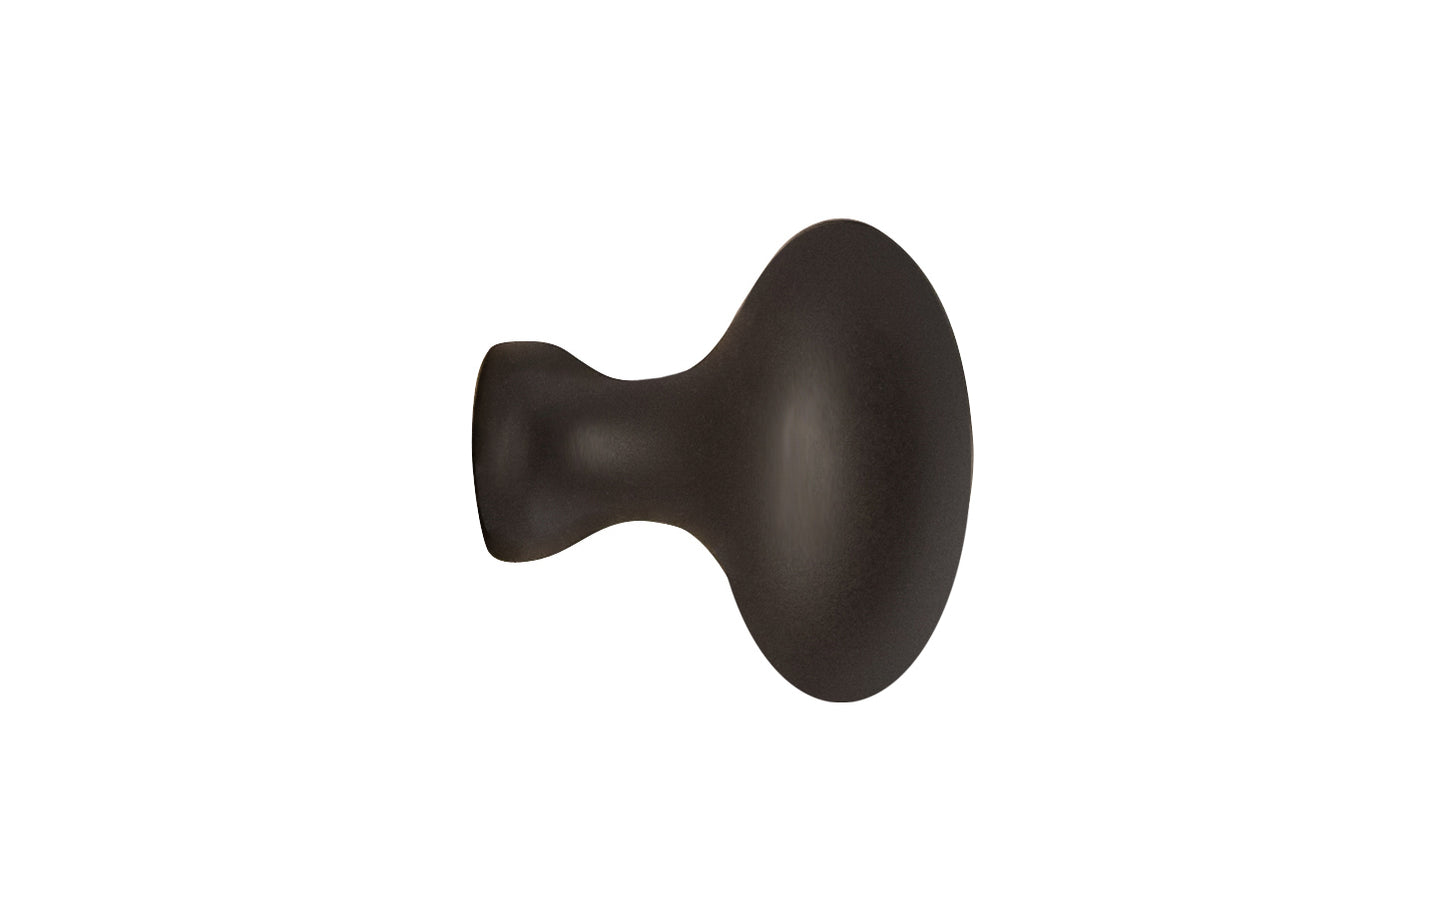 Vintage-style Hardware · Classic & Traditional Solid Brass Cabinet Oval Knob. 1" length size knob. Quality solid brass core, this stylish knob has a smooth & weighty fee. May be mounted vertically or horizontally. Great for kitchens, bathrooms, on furniture, cabinets, drawers, small doors, cabinet doors. Oil Rubbed Bronze finish.